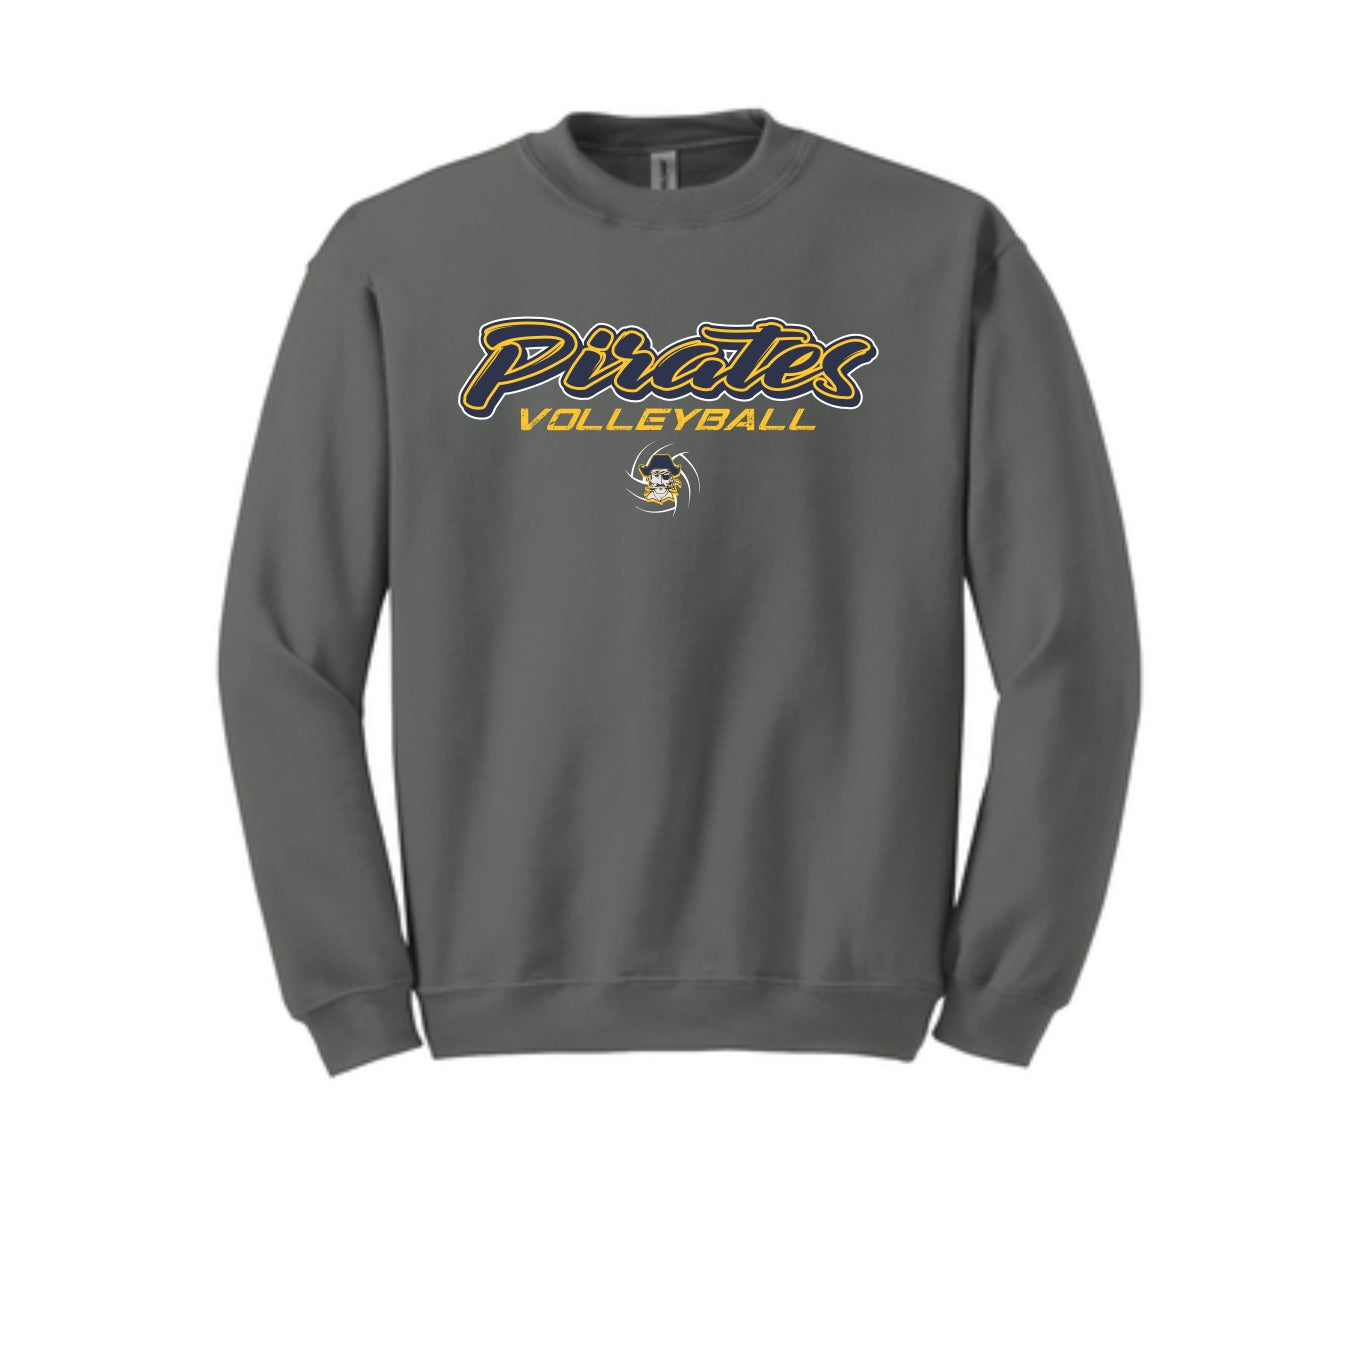 Pirate Volleyball - Fleece Crew - Adult/Youth